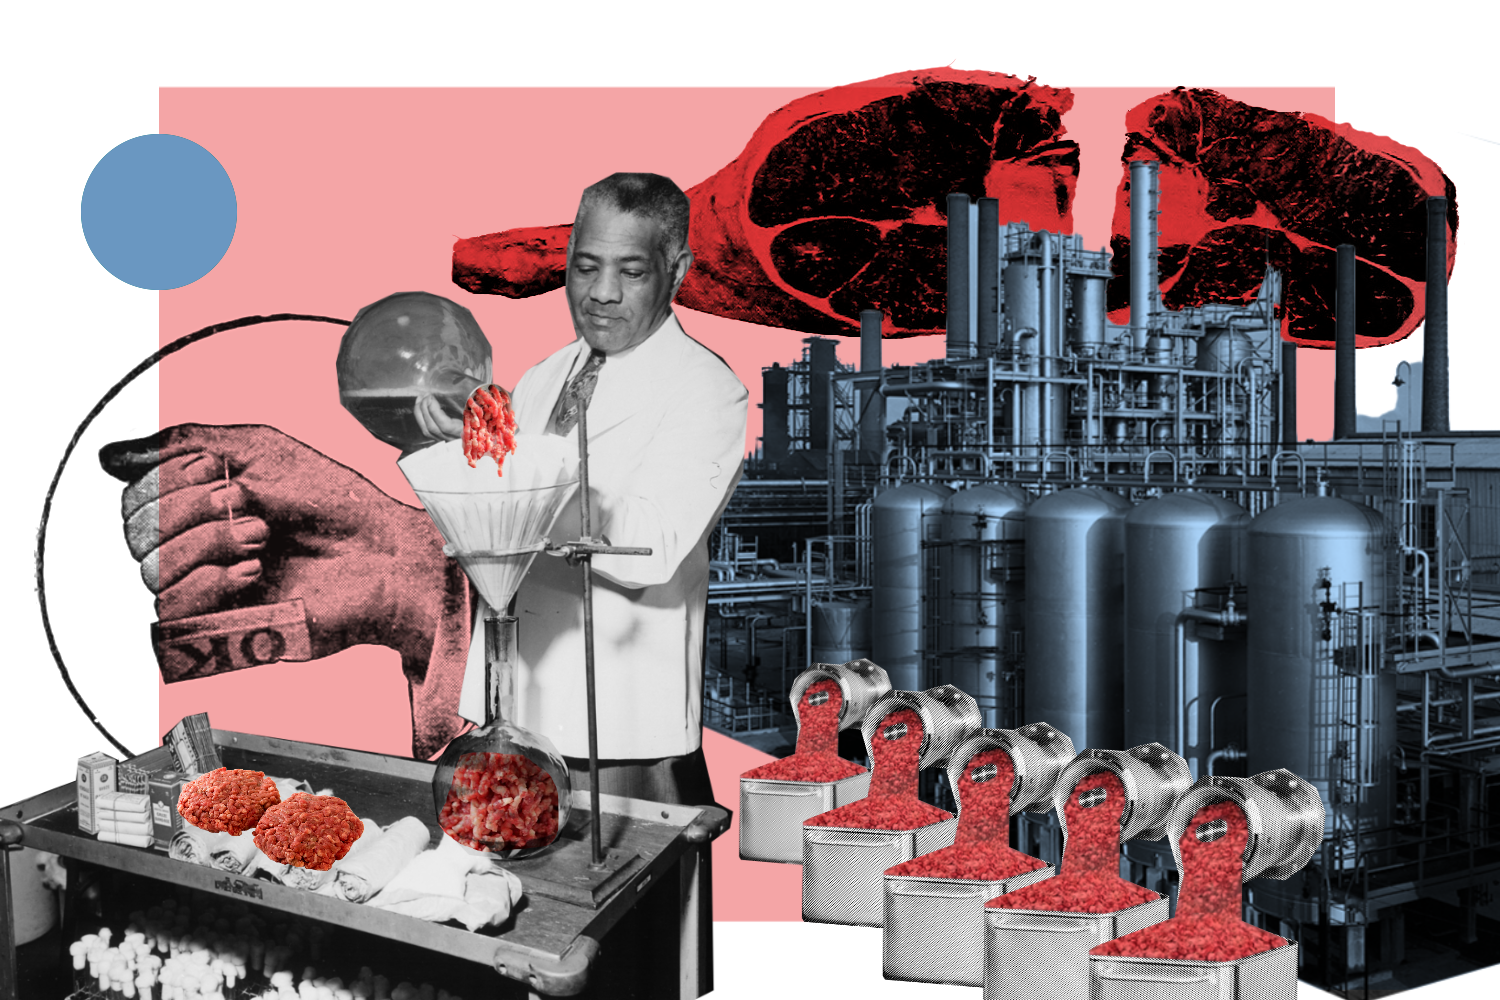 A collage using archival photographs depicts a scientist distilling meat in a lab while a futuristic bioreactor pumps out freshly grown meat